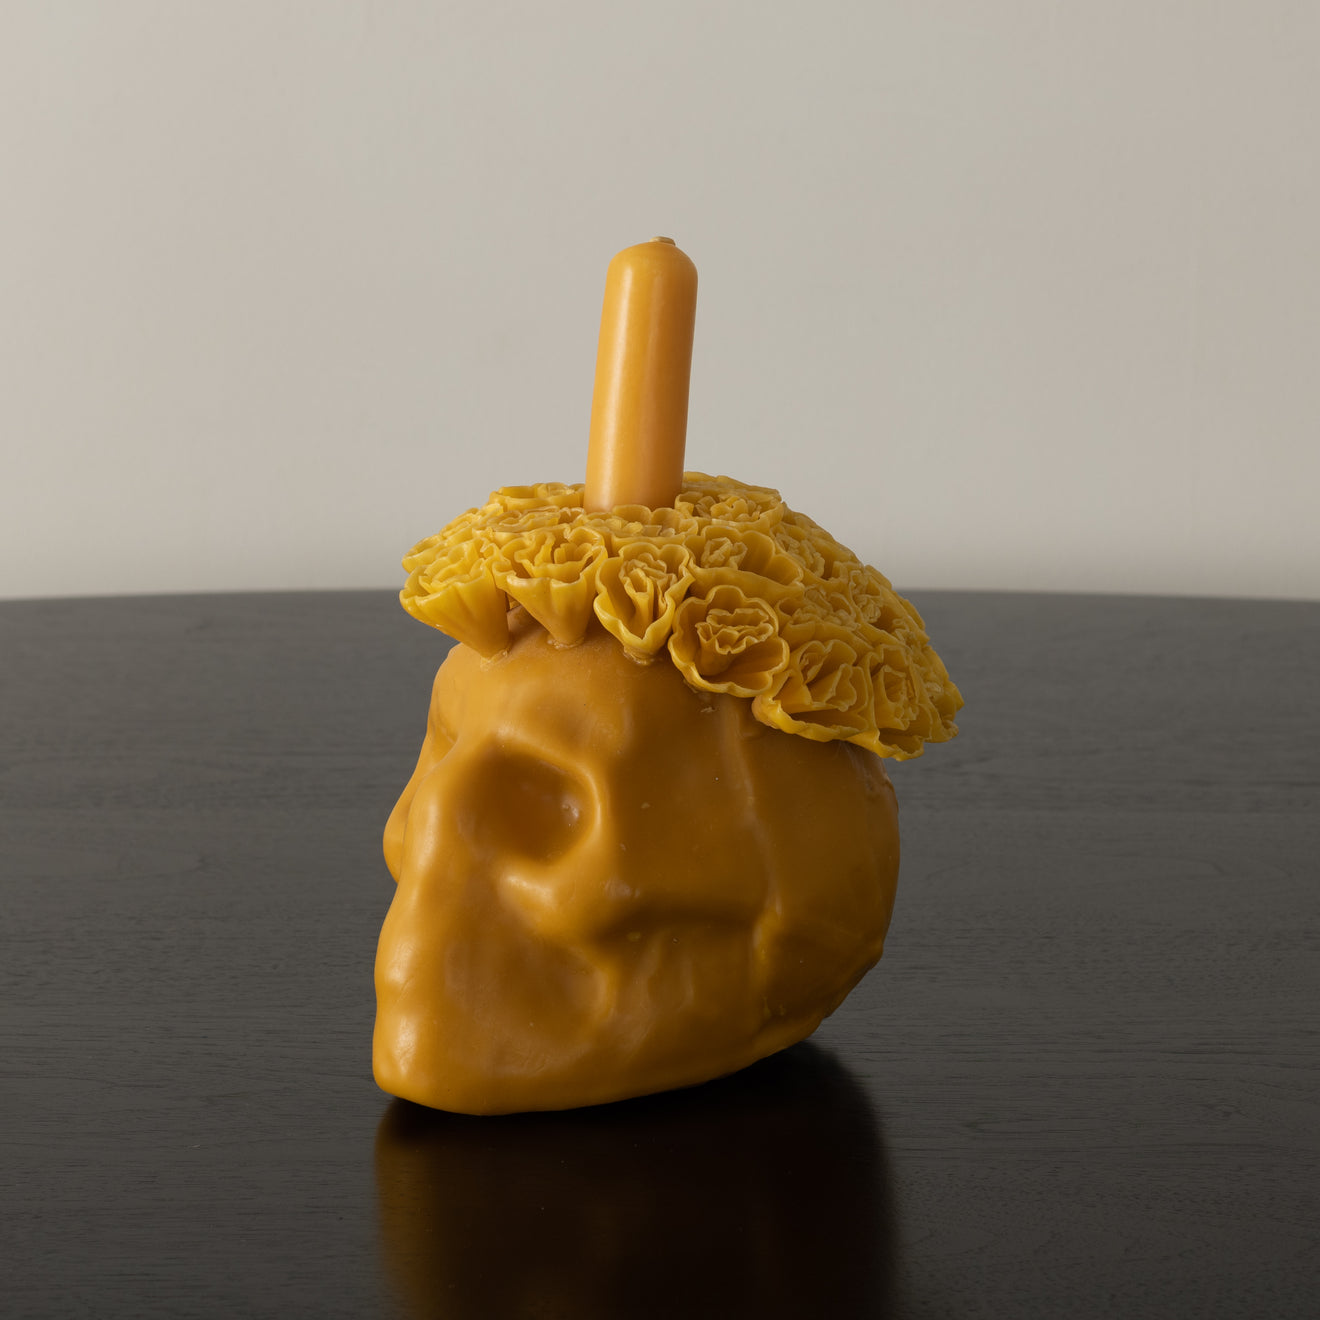 ARTISANAL BEESWAX CANDLE